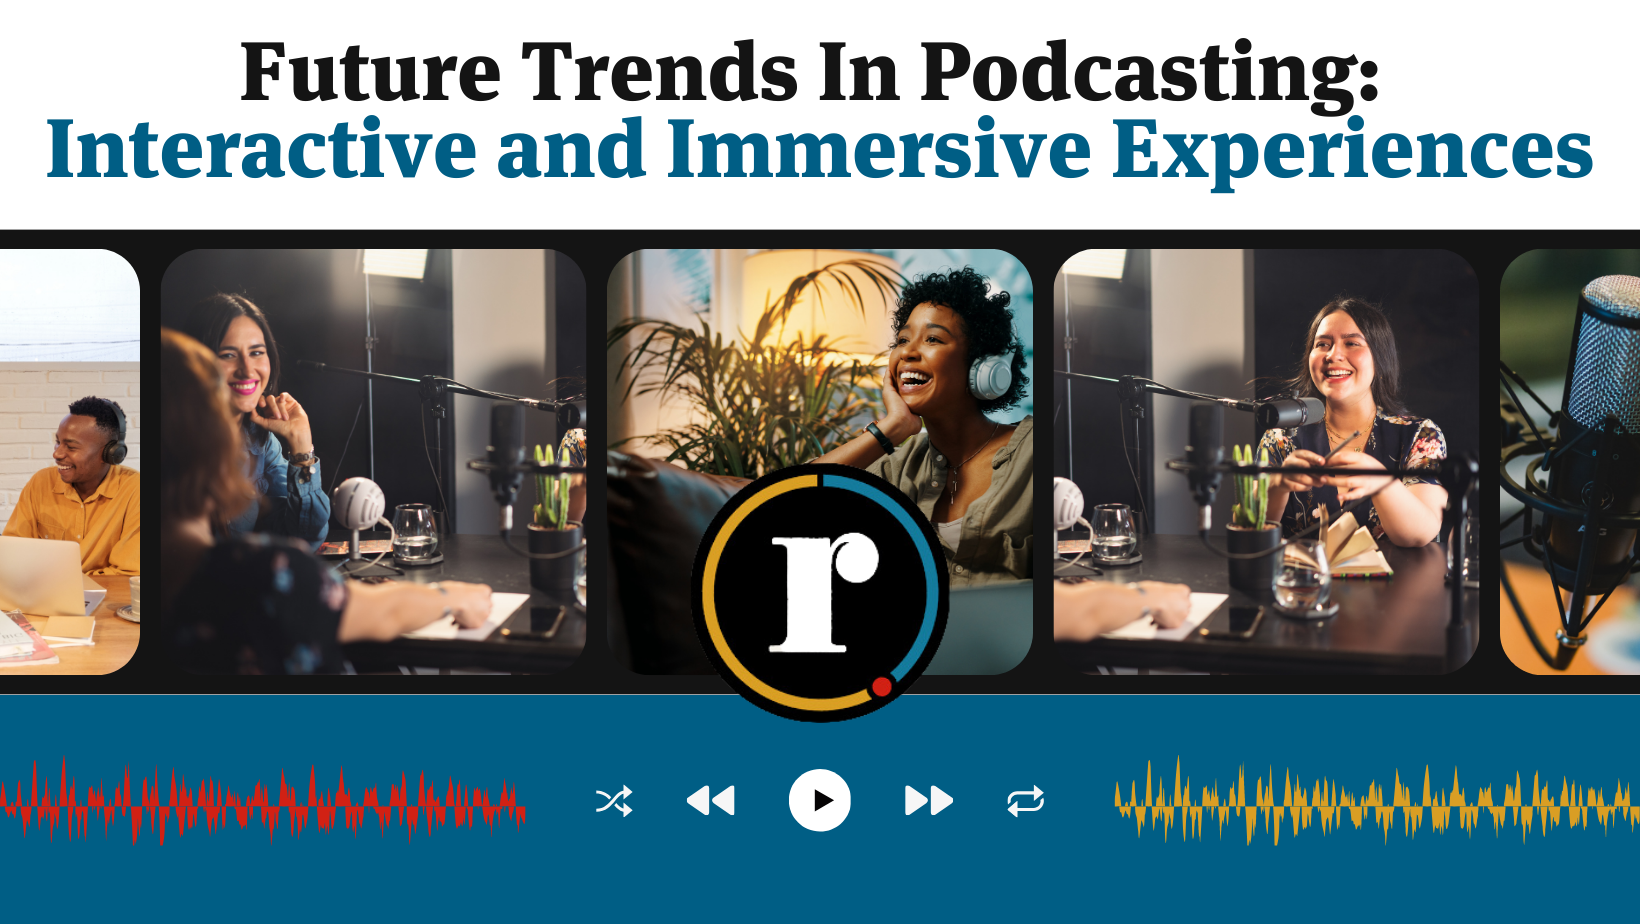 Future Trends in Podcasting: Interactive and Immersive Experiences